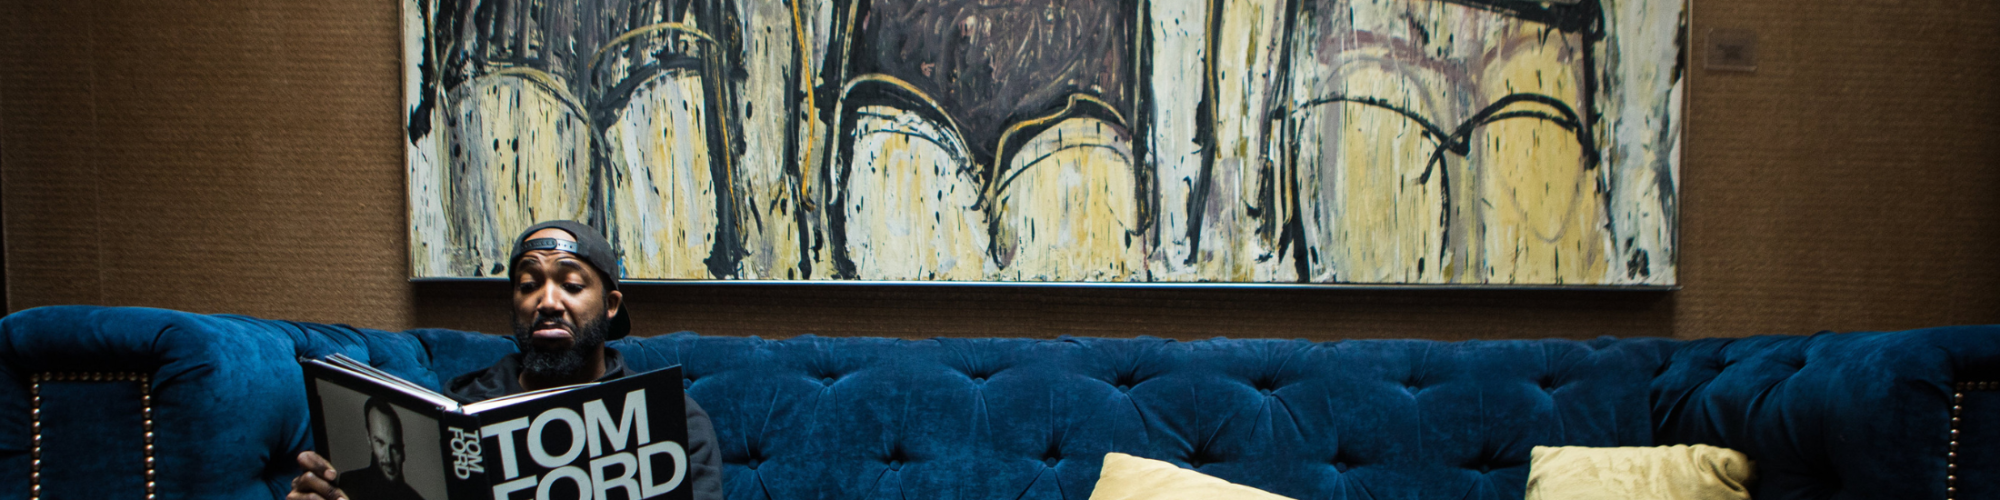 A man reads a Tom Ford book while sitting on a blue sofa with two yellow pillows, in front of an abstract painting of chairs.